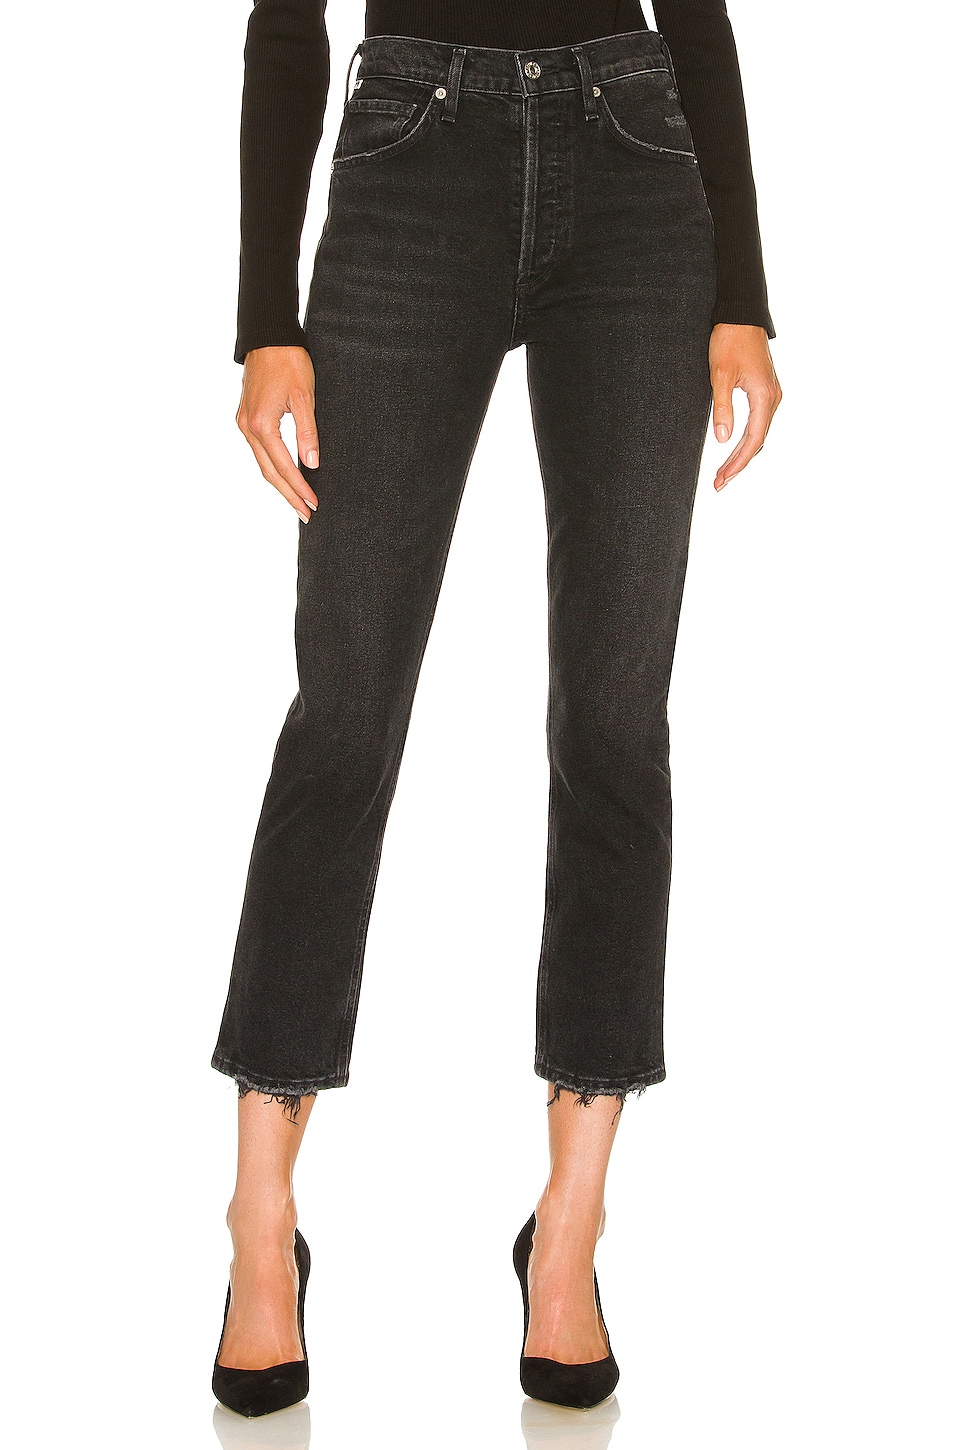 Citizens of Humanity Jolene High Rise Vintage Slim in Stormy | REVOLVE